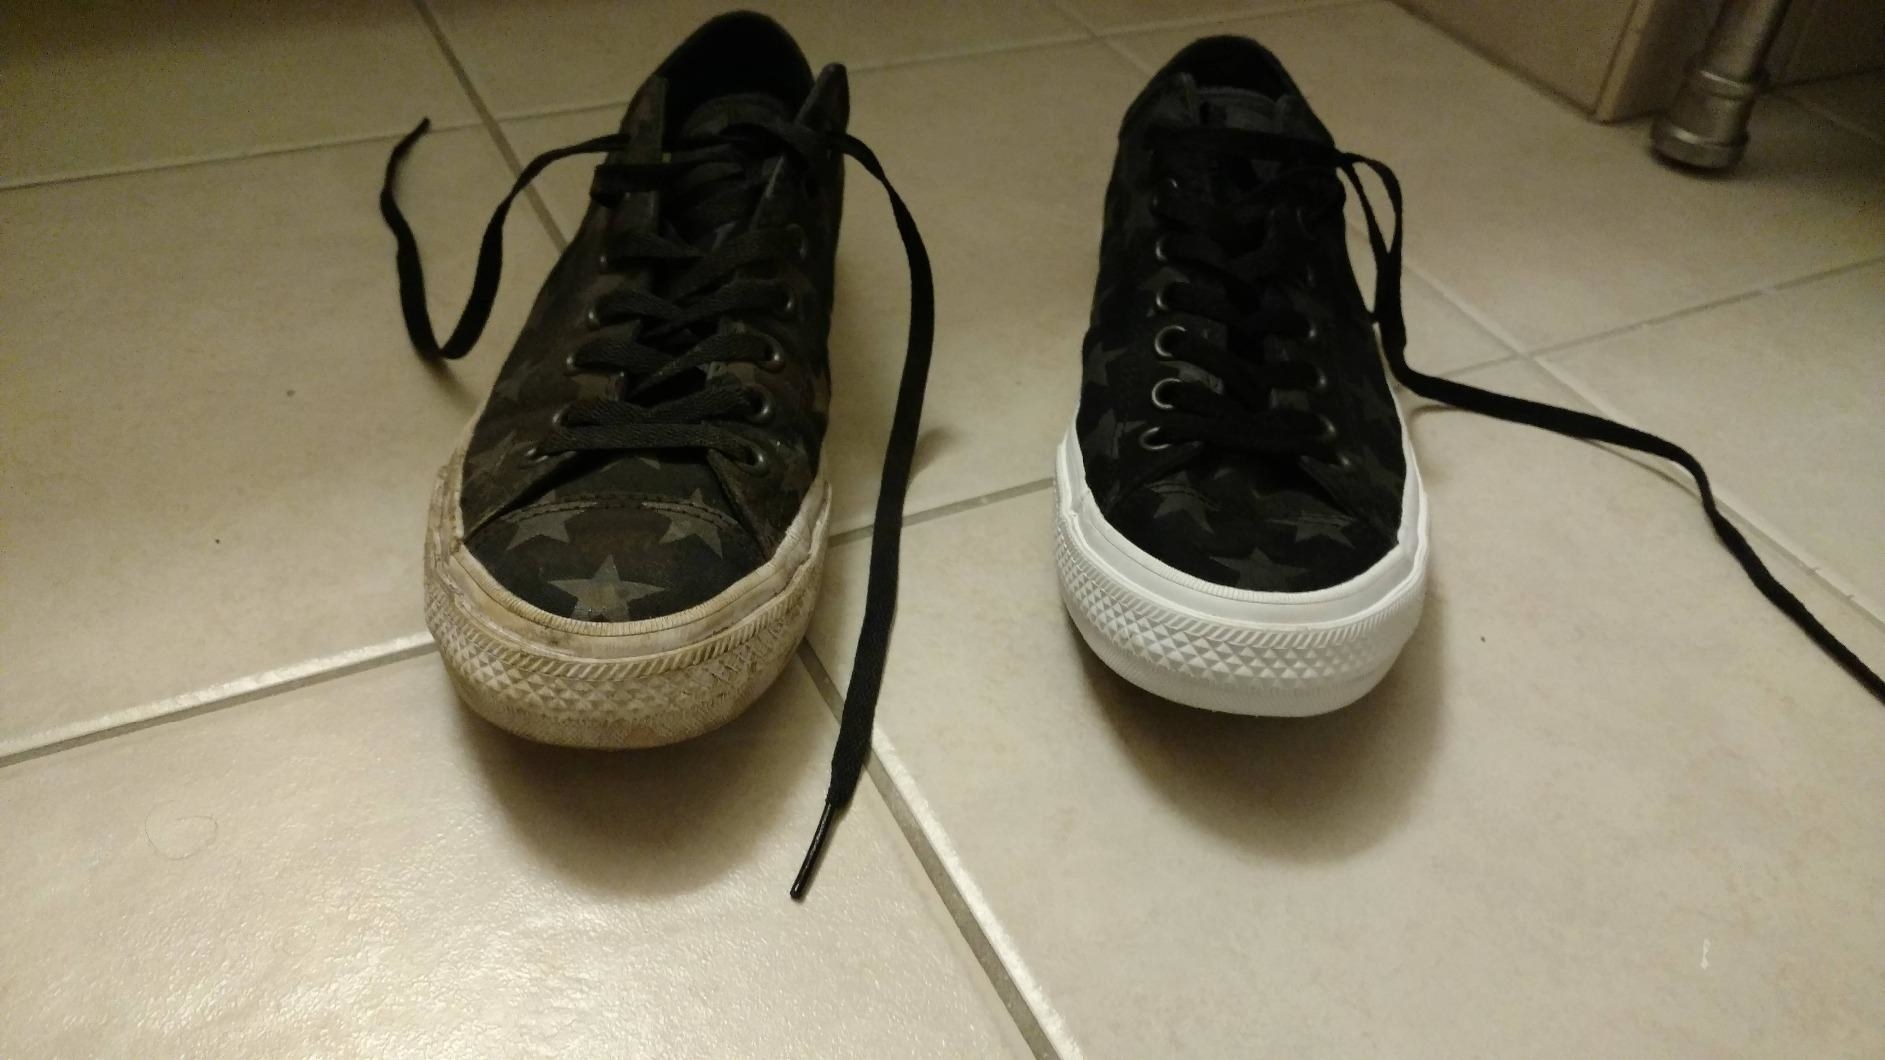 A pair of sneakers, the left one with completely dirty soles, and the right with white, new-looking soles